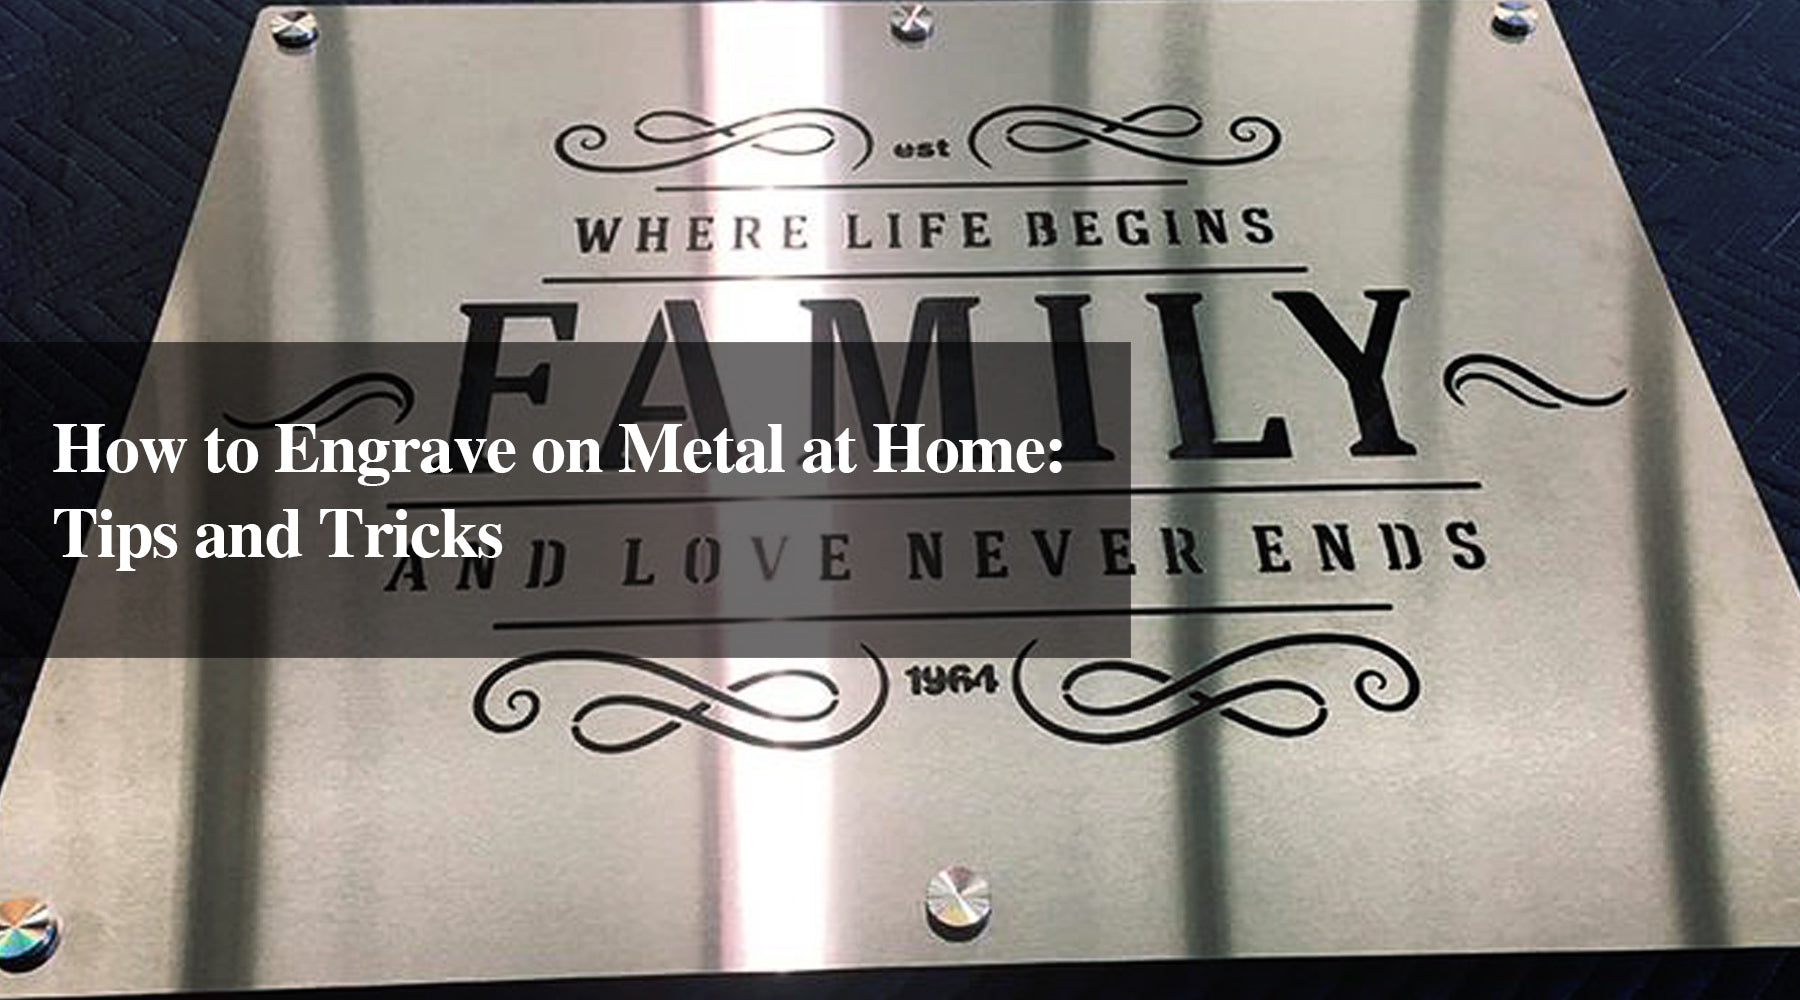 How to Engrave on Metal at Home: Tips and Tricks